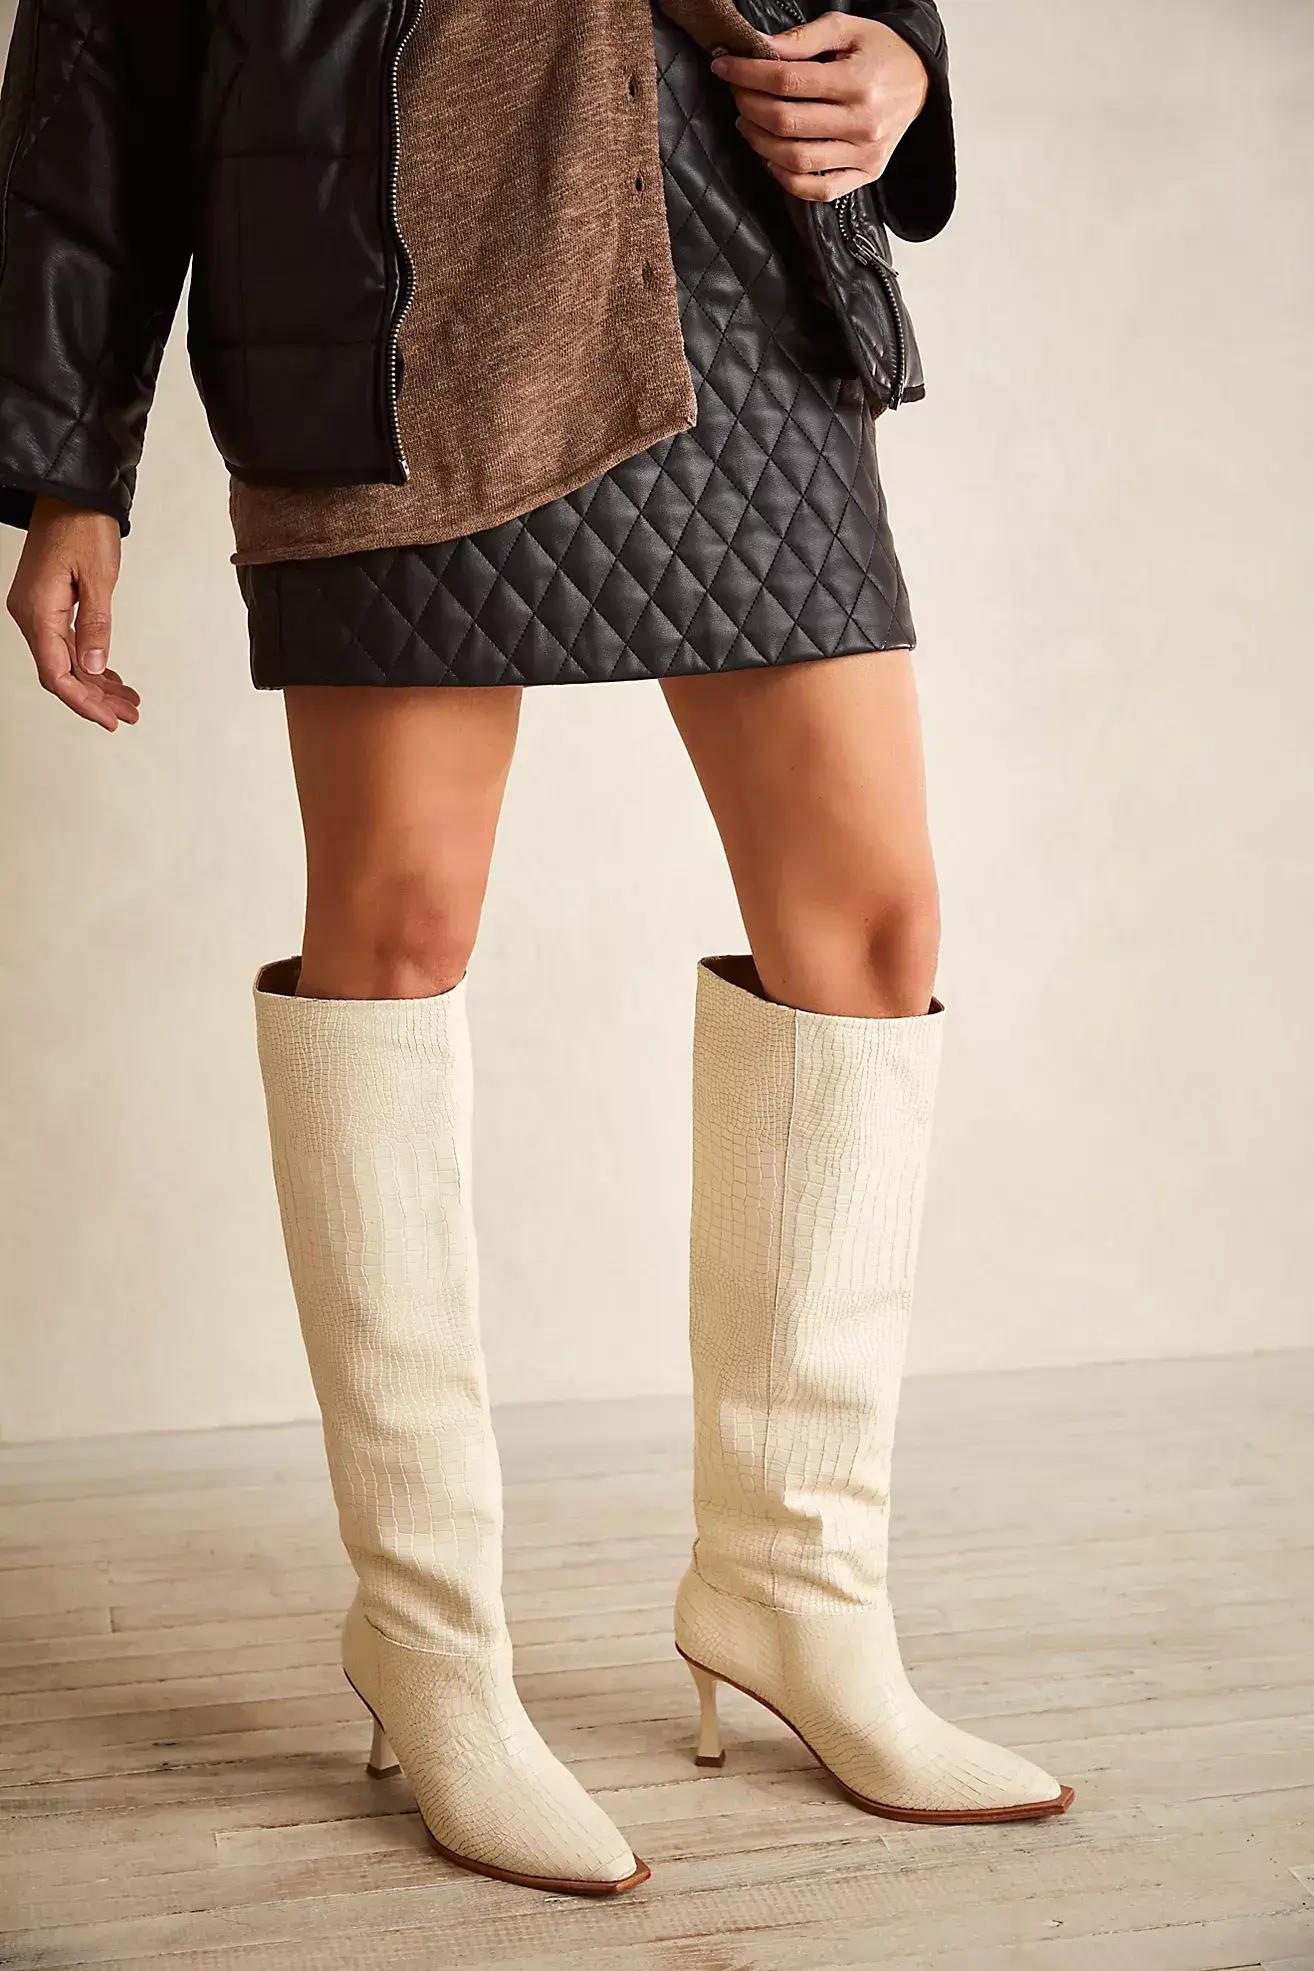 Shoes We Are Loving At Free People Croc Embossed Heeled Boots must have boots for fall the best fall shoes must have fall shoes how to buy tall boots for fall an winter the best ivory tall boots croc embossed tall boots